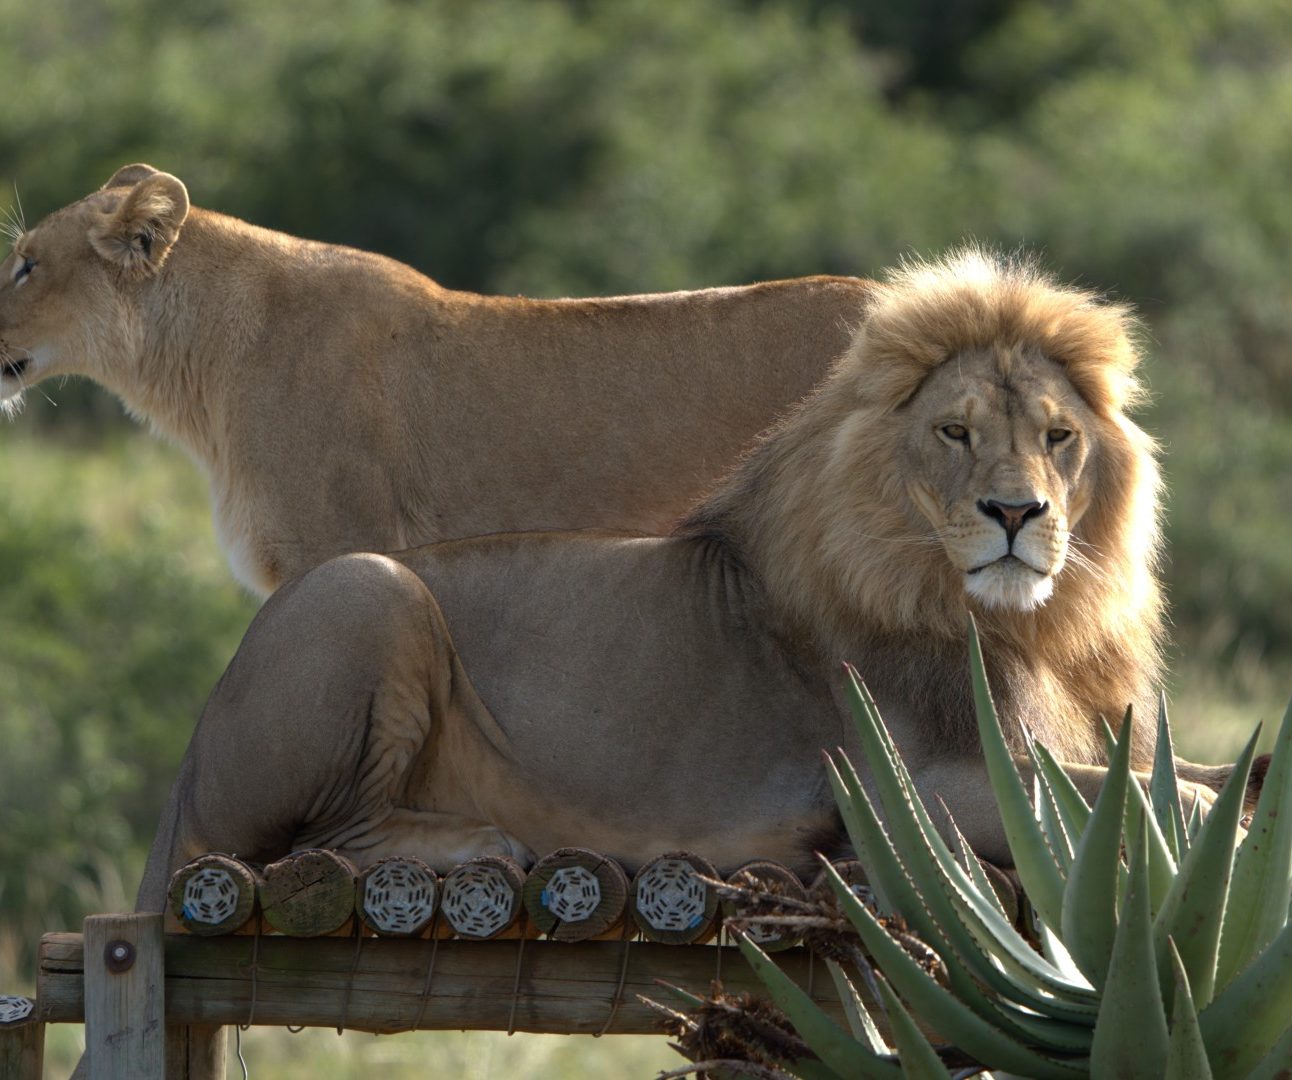 A lion lying peacefully on a wooden platform surrounded by greenery and African plants, with a lioness standing on the platform behind him